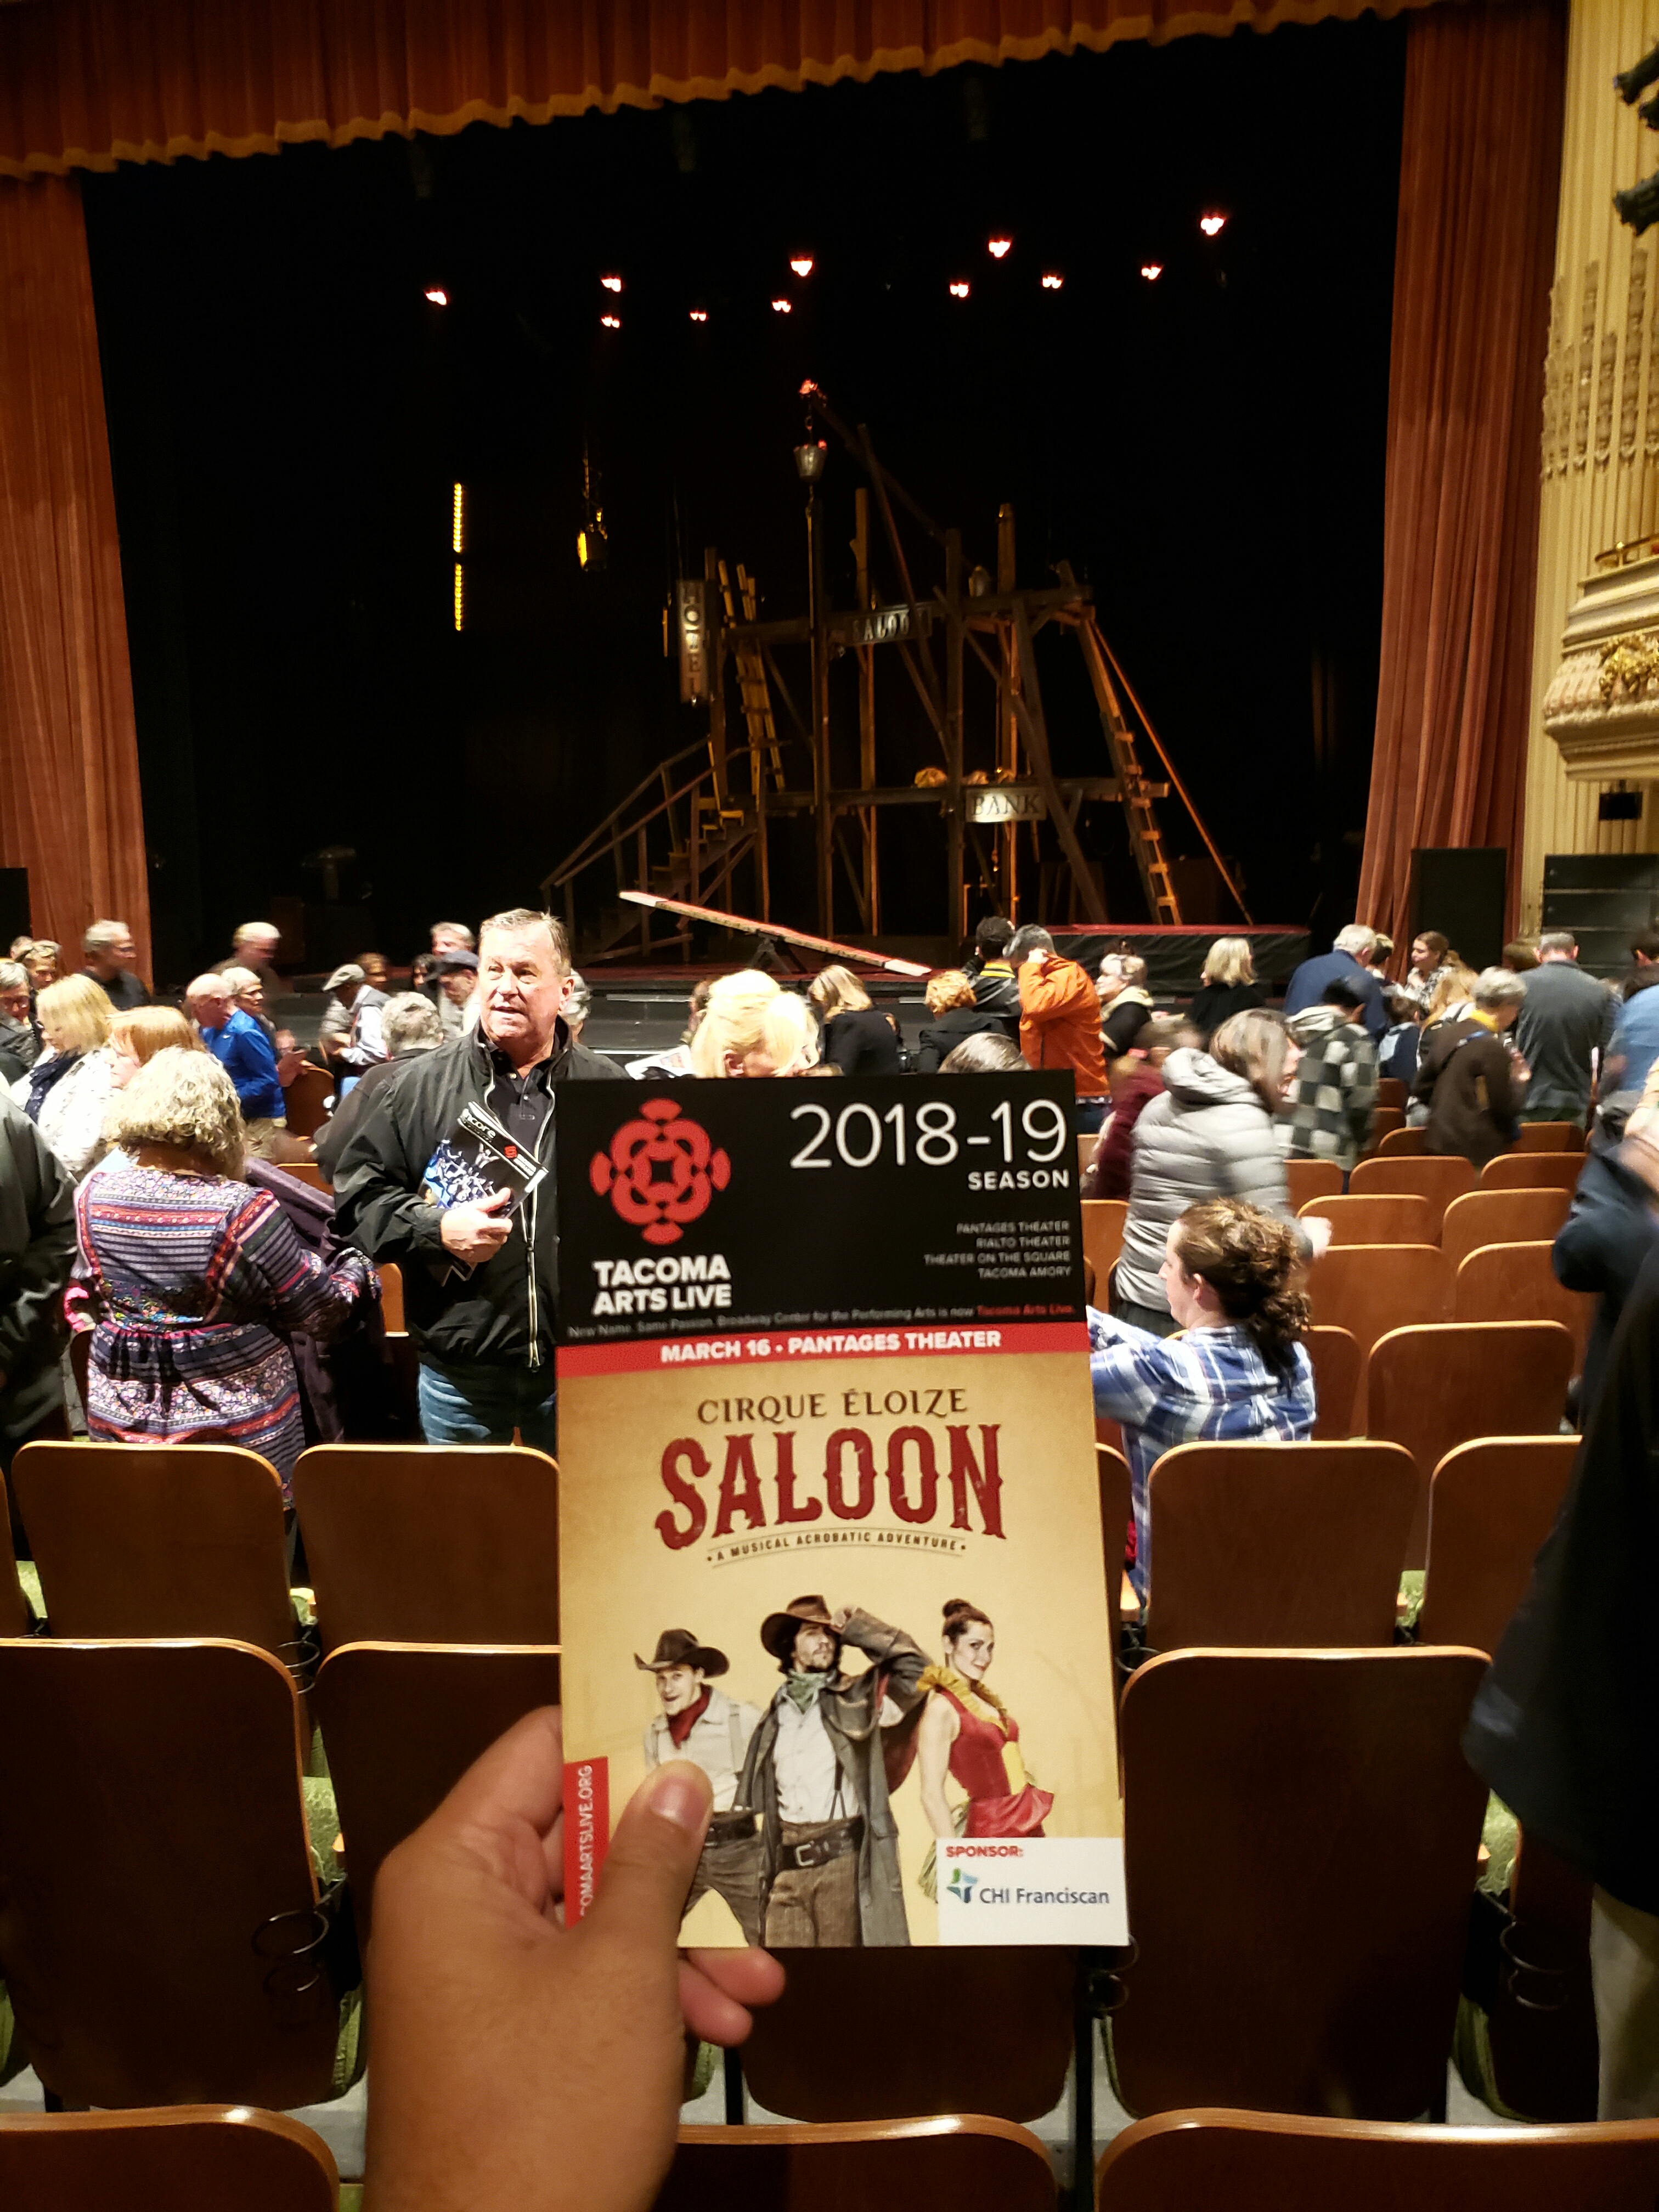 Watched @CirqueEloize's #Saloon at @TacomaArtsLive. Better than @CirqueDuSoleil but it was no @Teatro_ZinZanni. #Corney comedic relief. Trailer was better than the real thing. #Circus #WildWildWest #Acrobatics